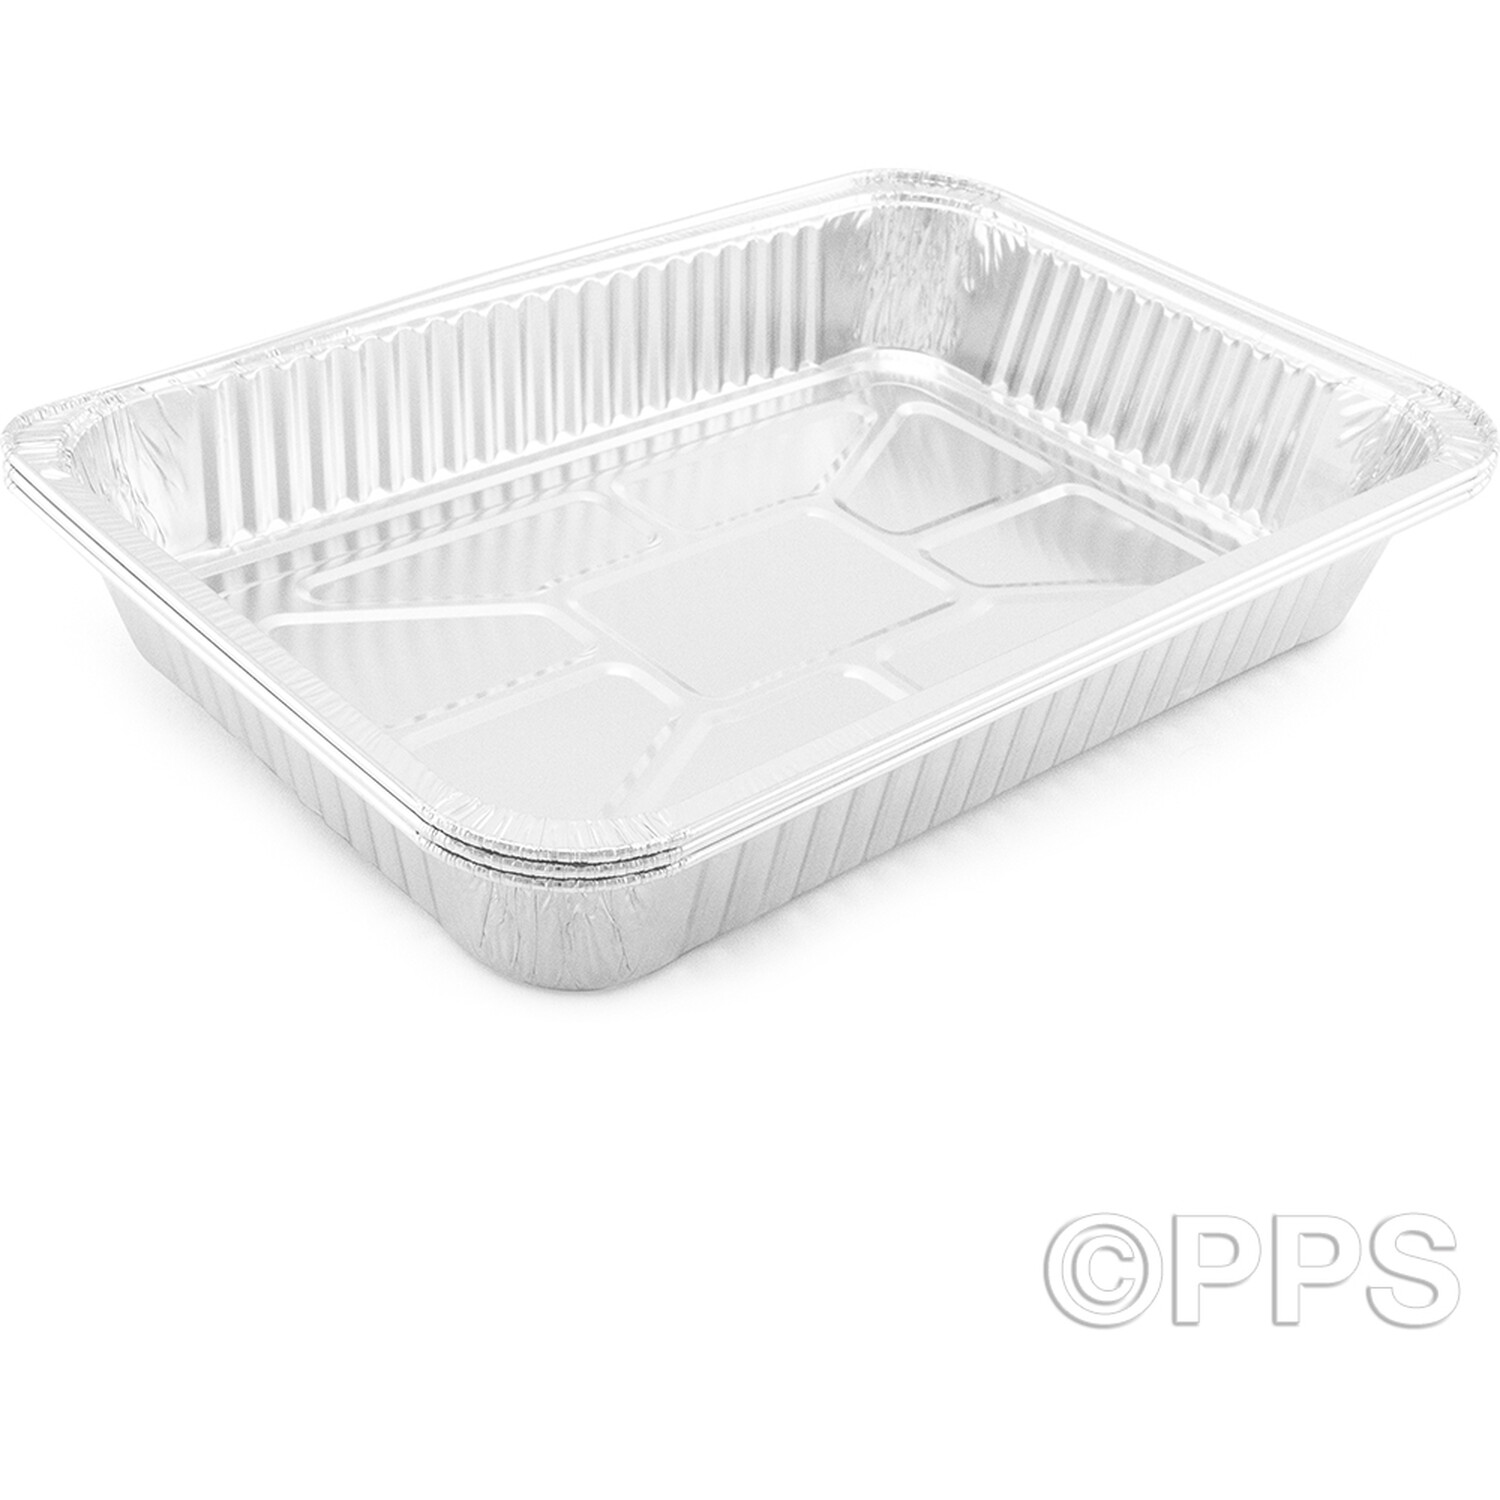 Silver Foil Bake Trays 3 Pack Image 3